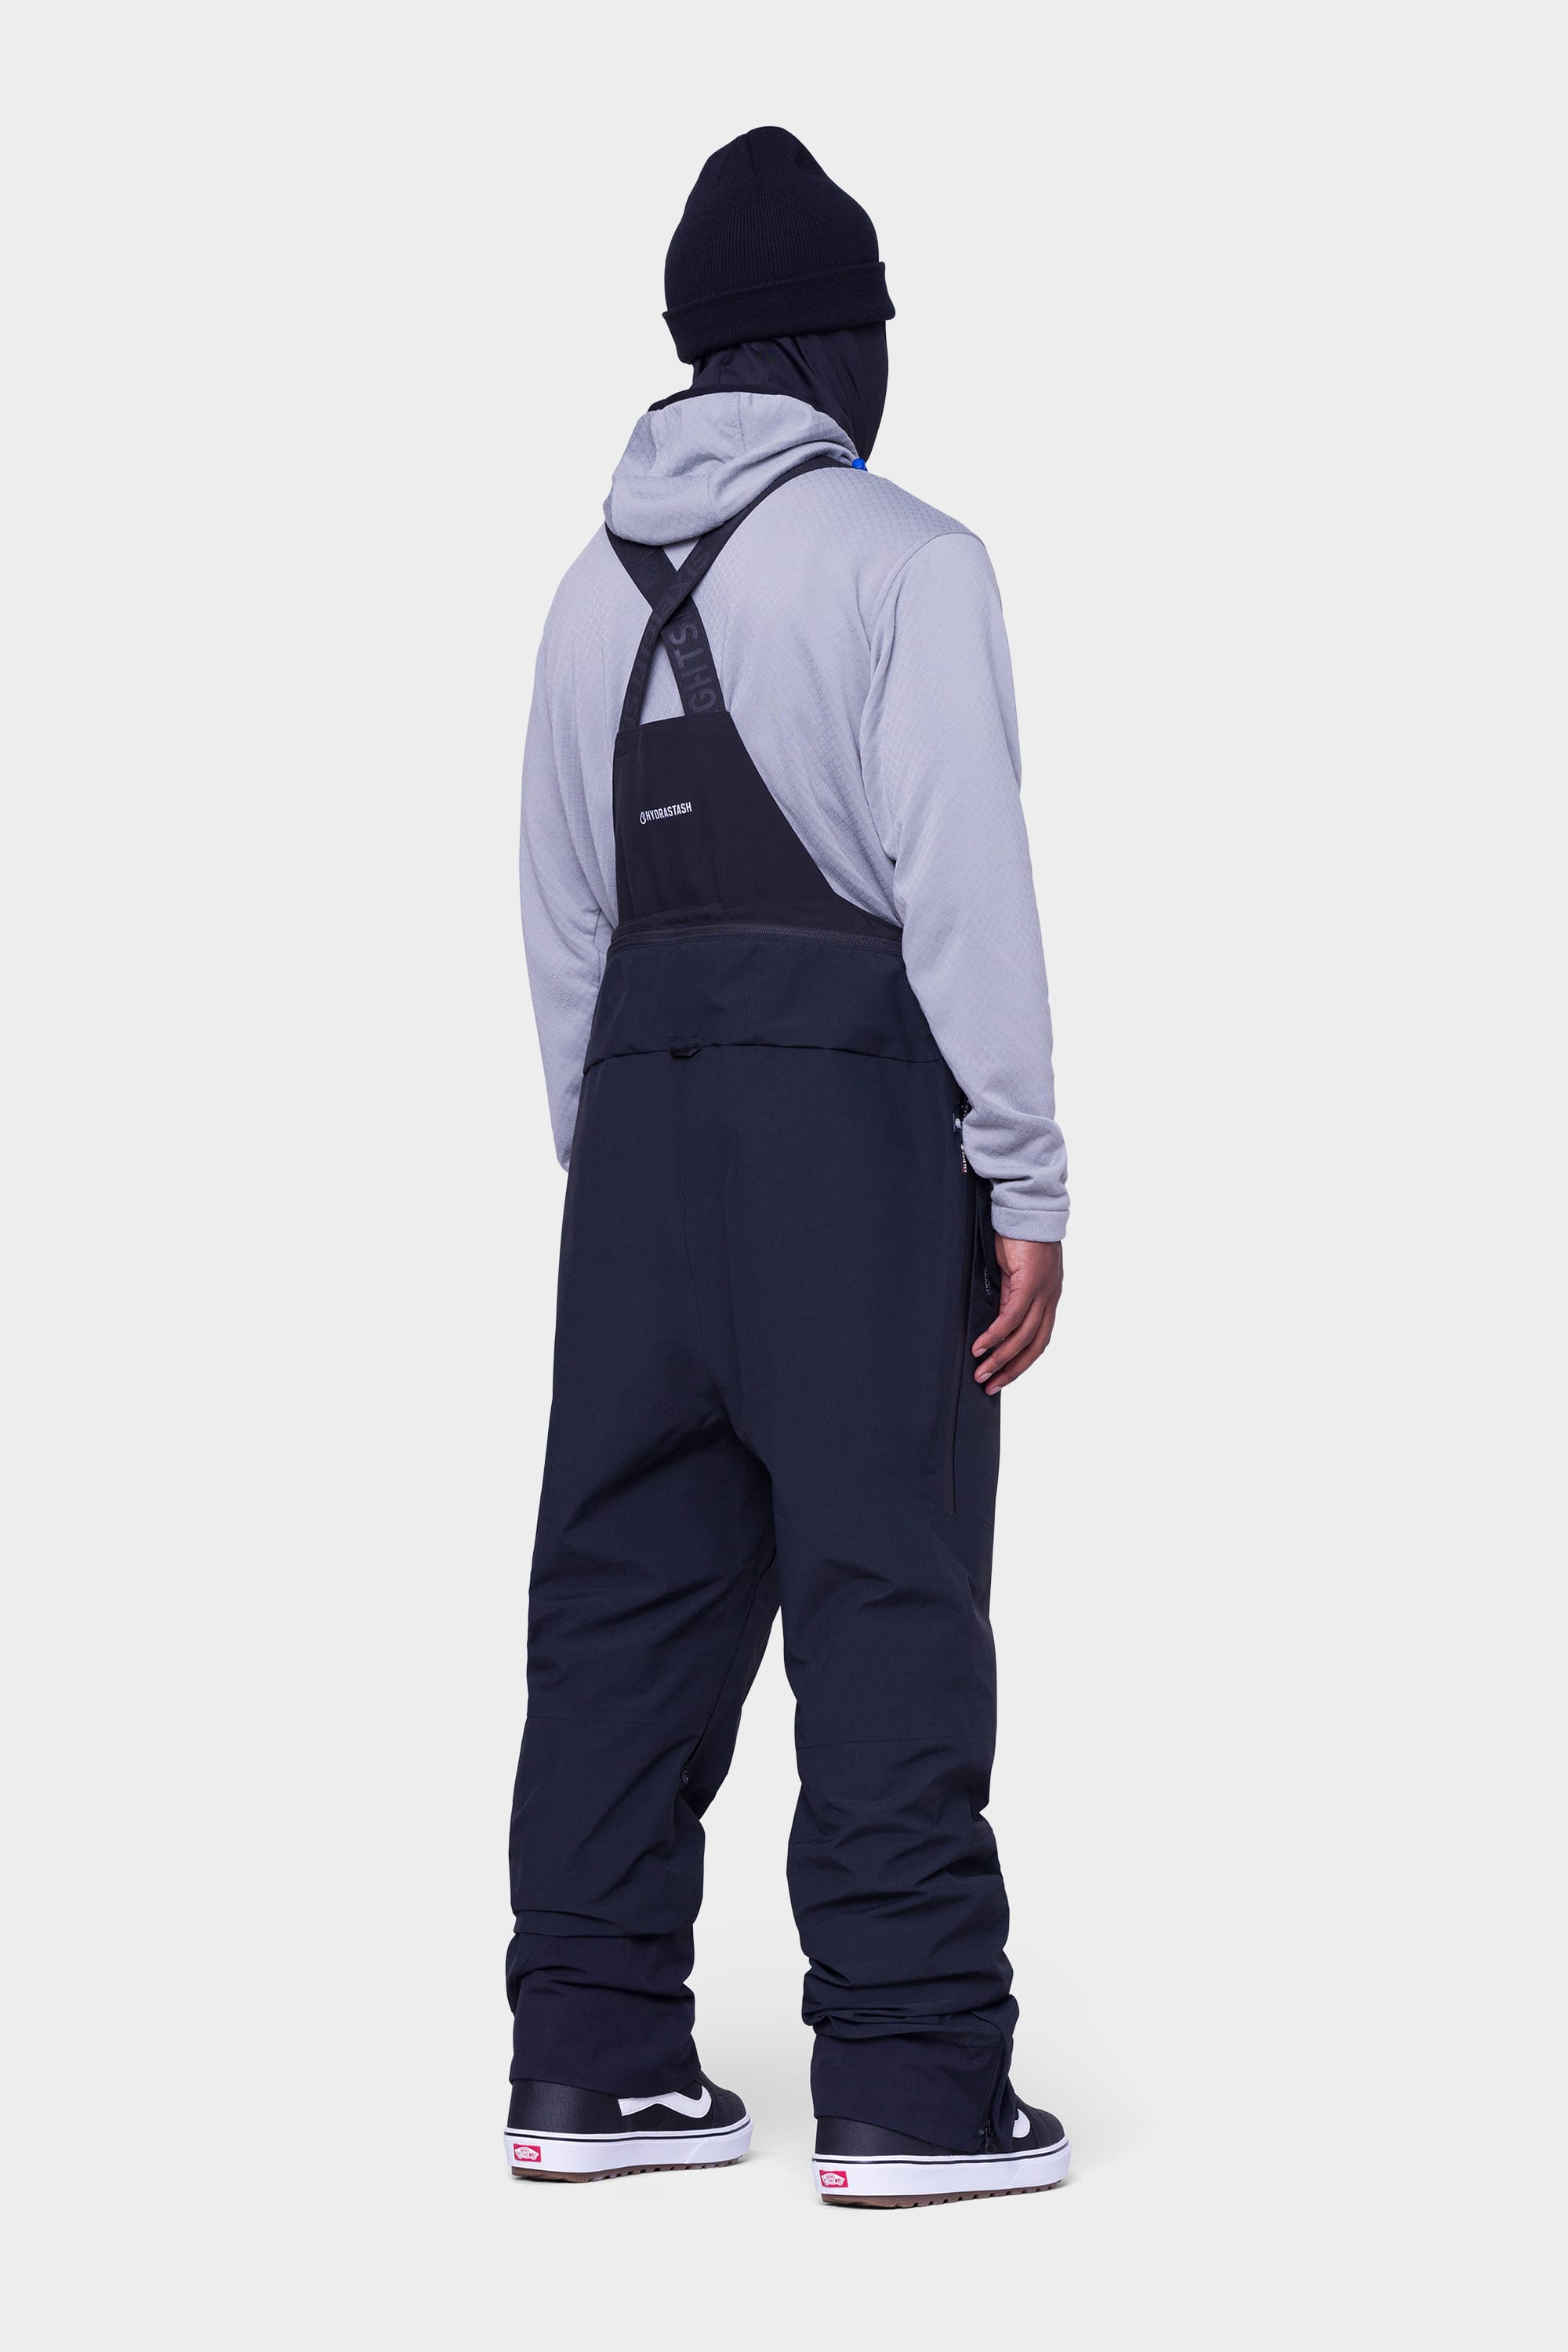 Men 3X Tall Goretex Bibs Extreme Cold Weather Ice Fishing Bib Insulated  Overalls